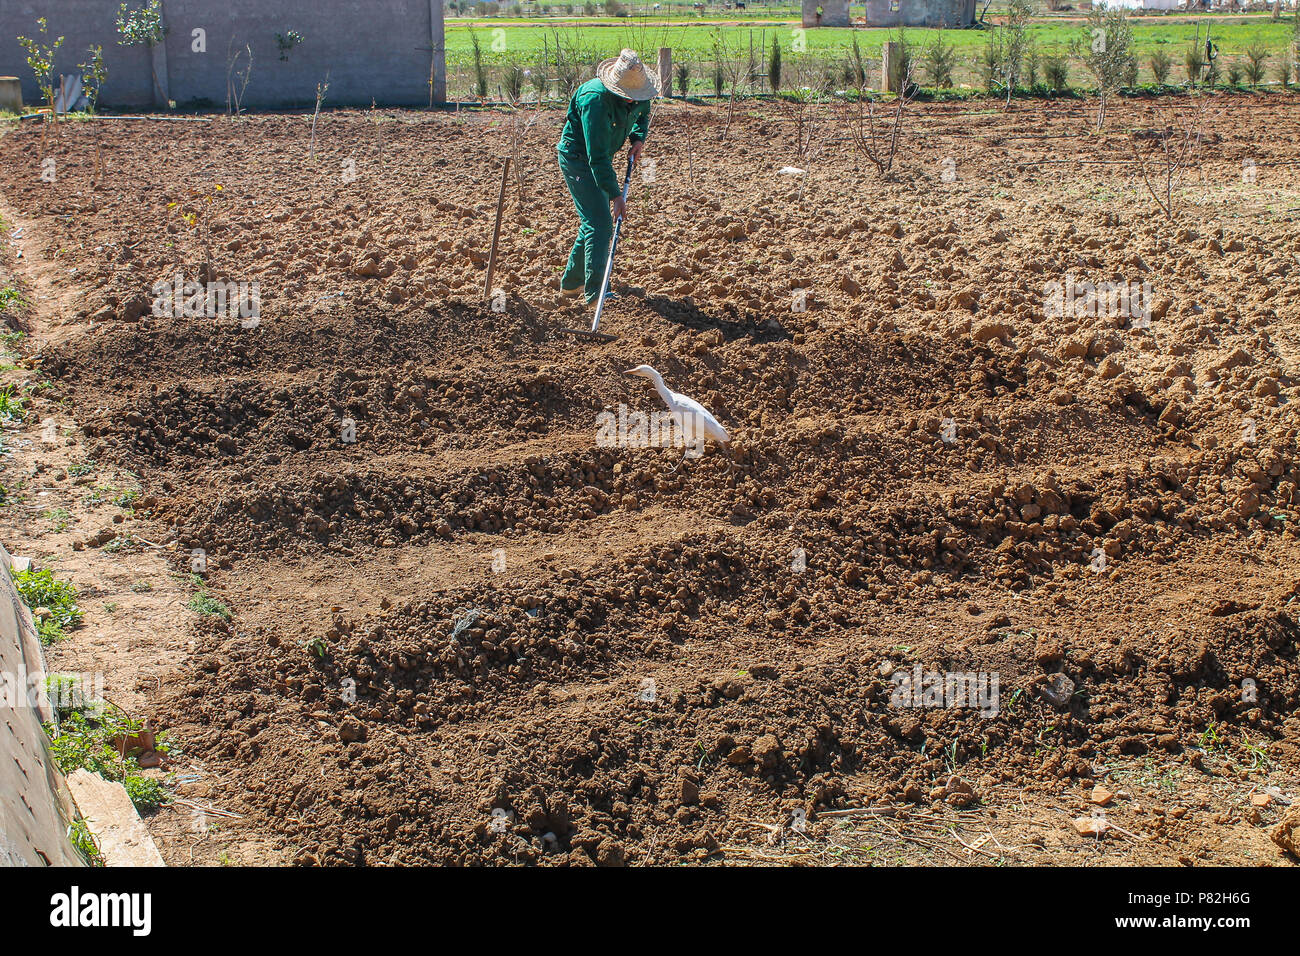 Man Cultivating garden with hand raker, geting ready for planting season. Stock Photo